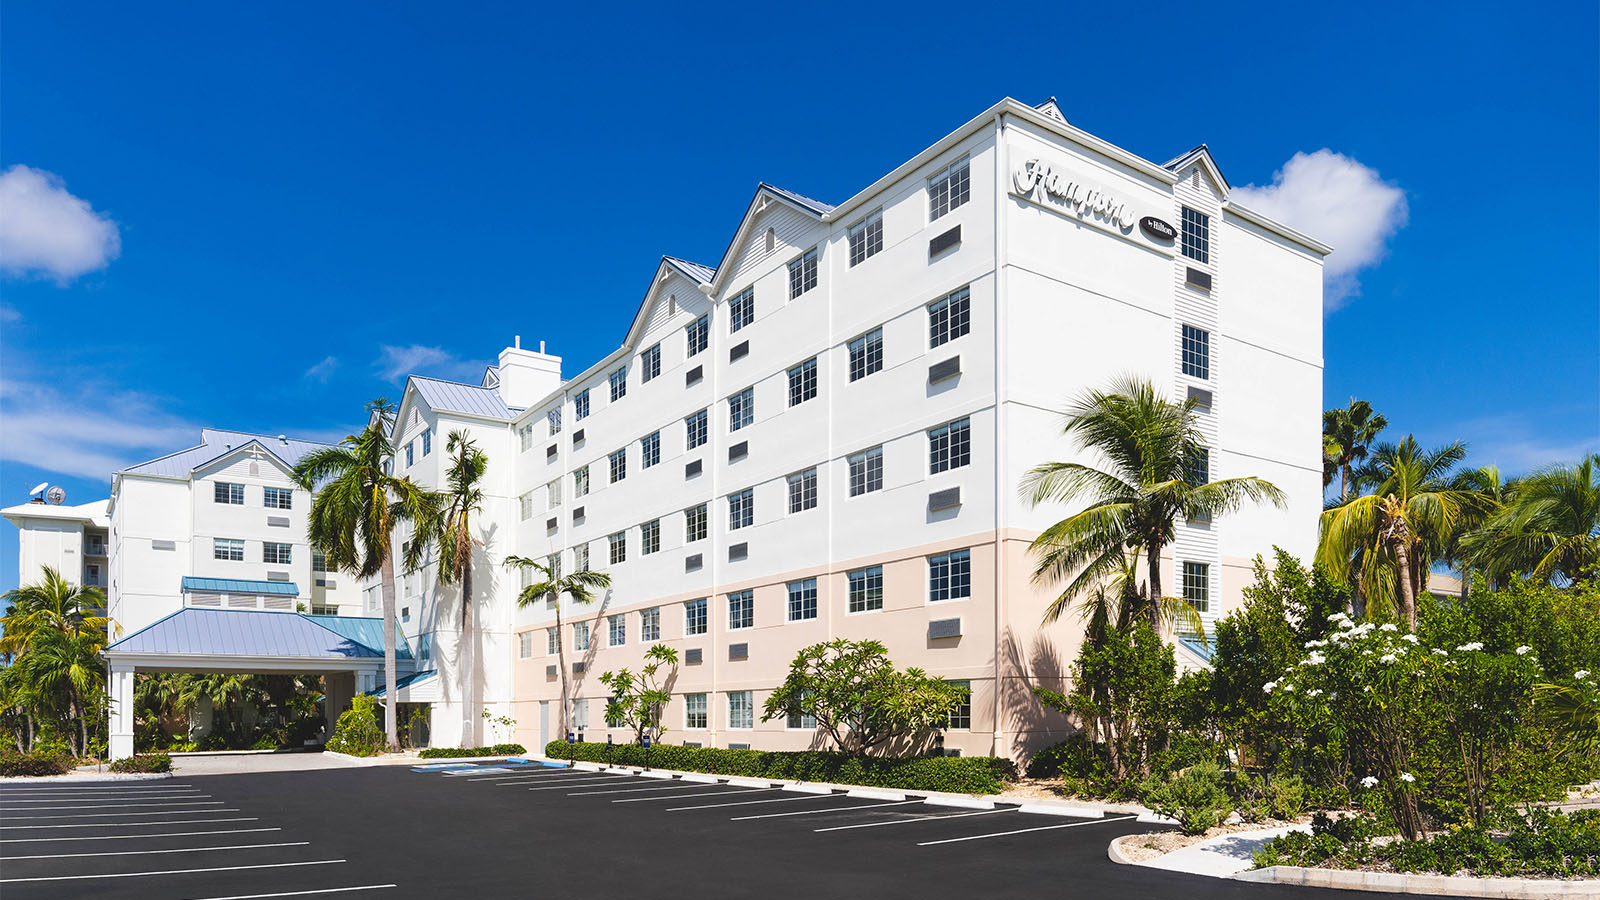 Featuring main image of Hampton by Hilton Grand Cayman